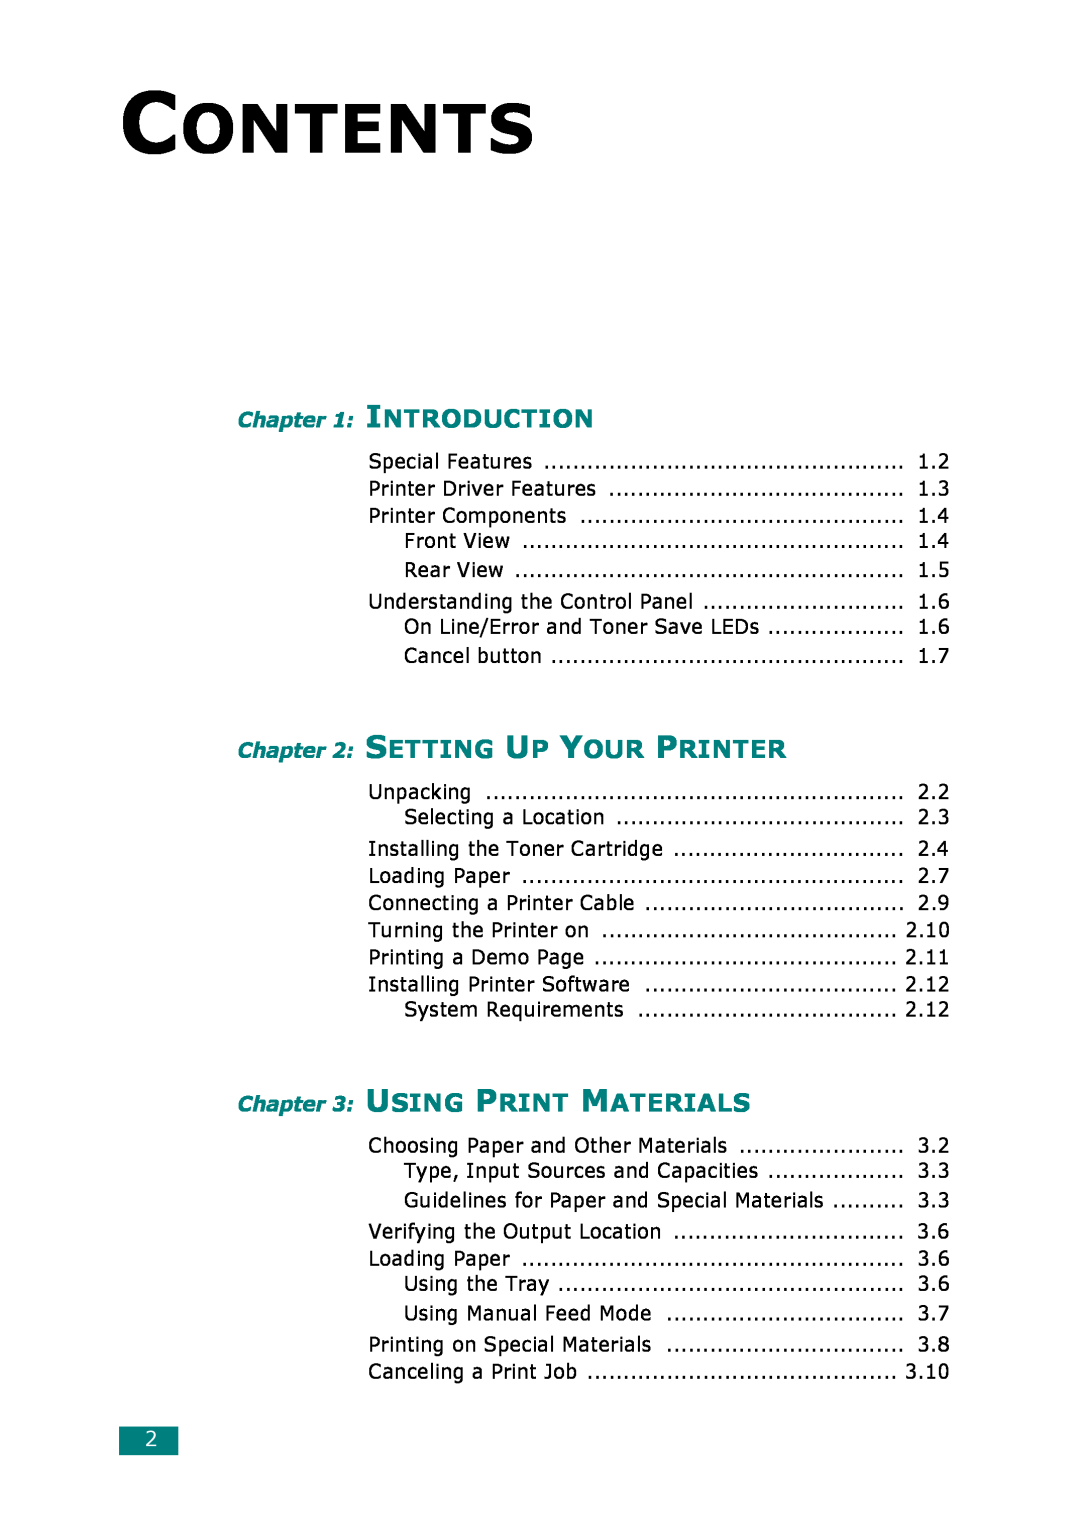 Samsung ML-1610 manual Contents, Setting Up Your Printer, Using Print Materials, Introduction 